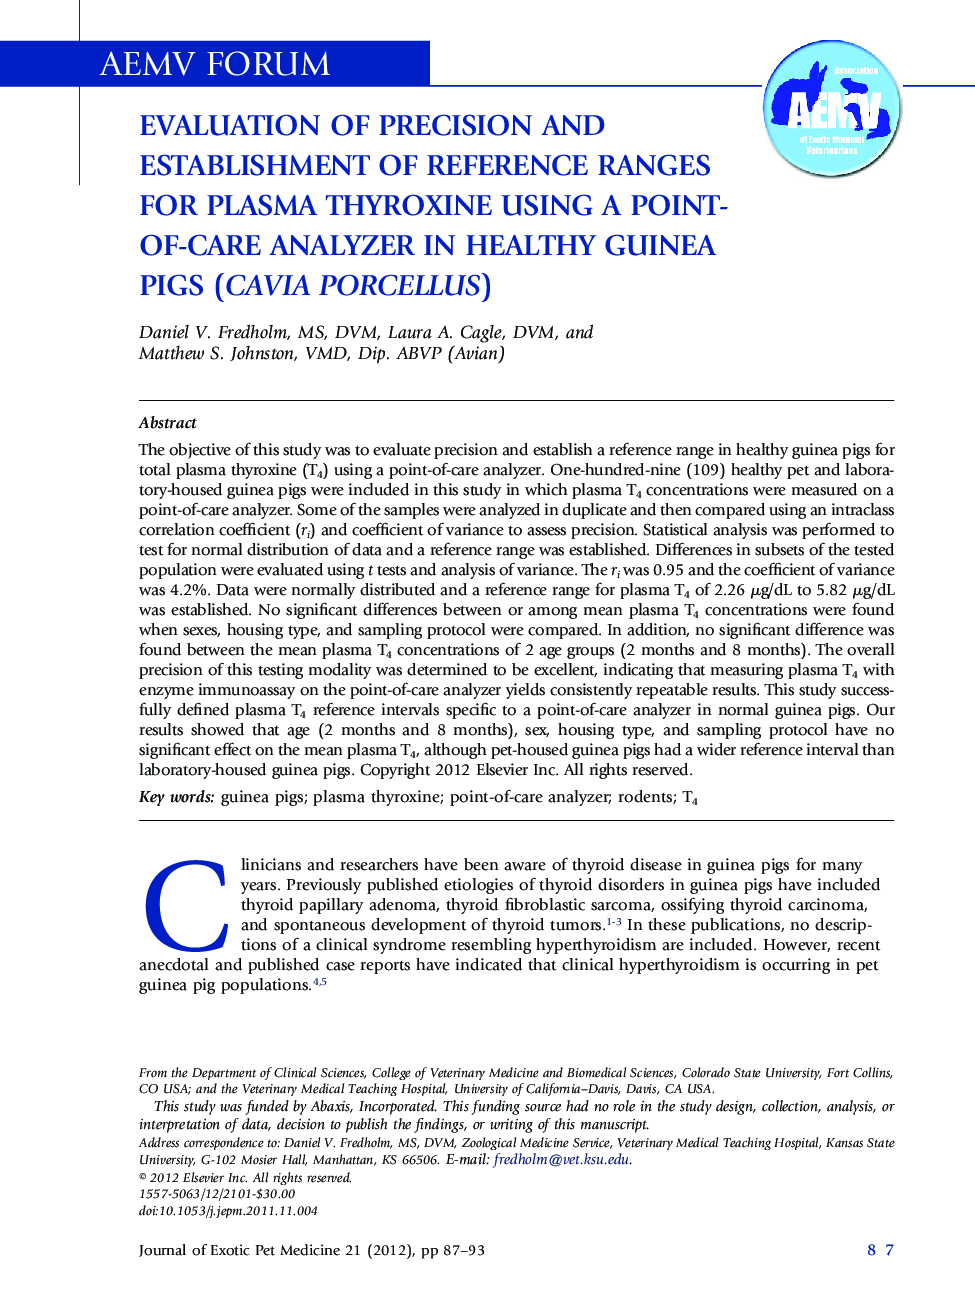 Evaluation of Precision and Establishment of Reference Ranges for Plasma Thyroxine using a Point-of-Care Analyzer in Healthy Guinea Pigs (Cavia porcellus) 